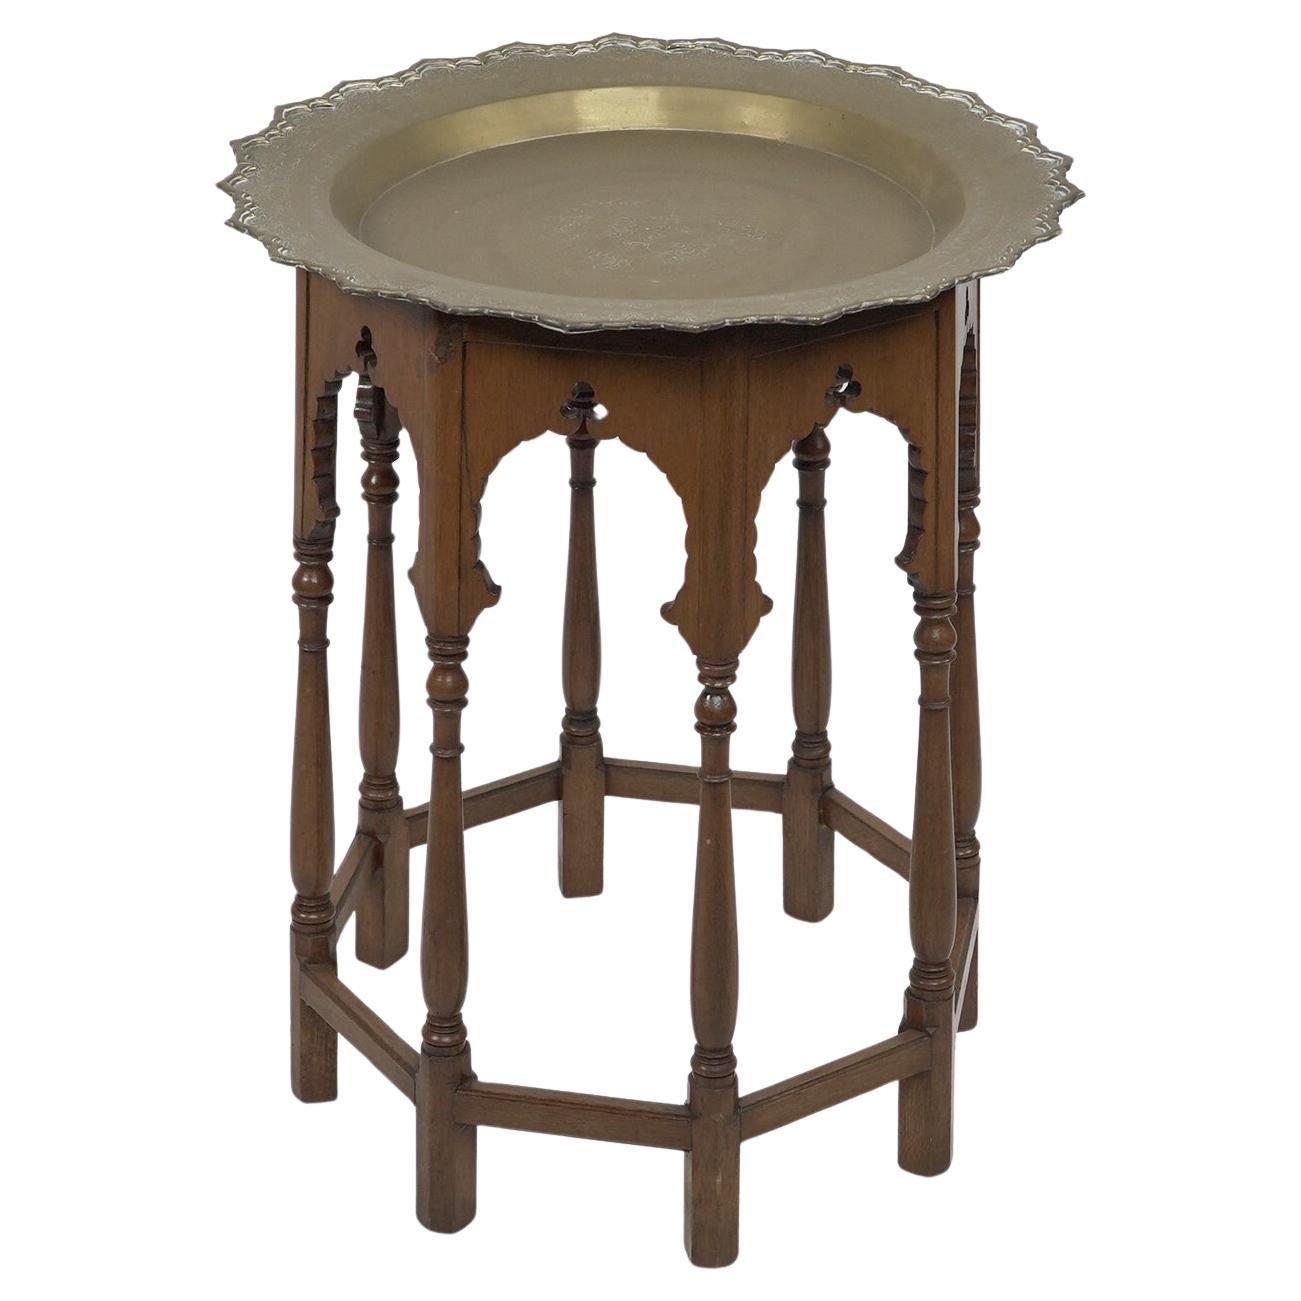 A Moorish-style side table with a heavy brass removable dish-shaped table top For Sale